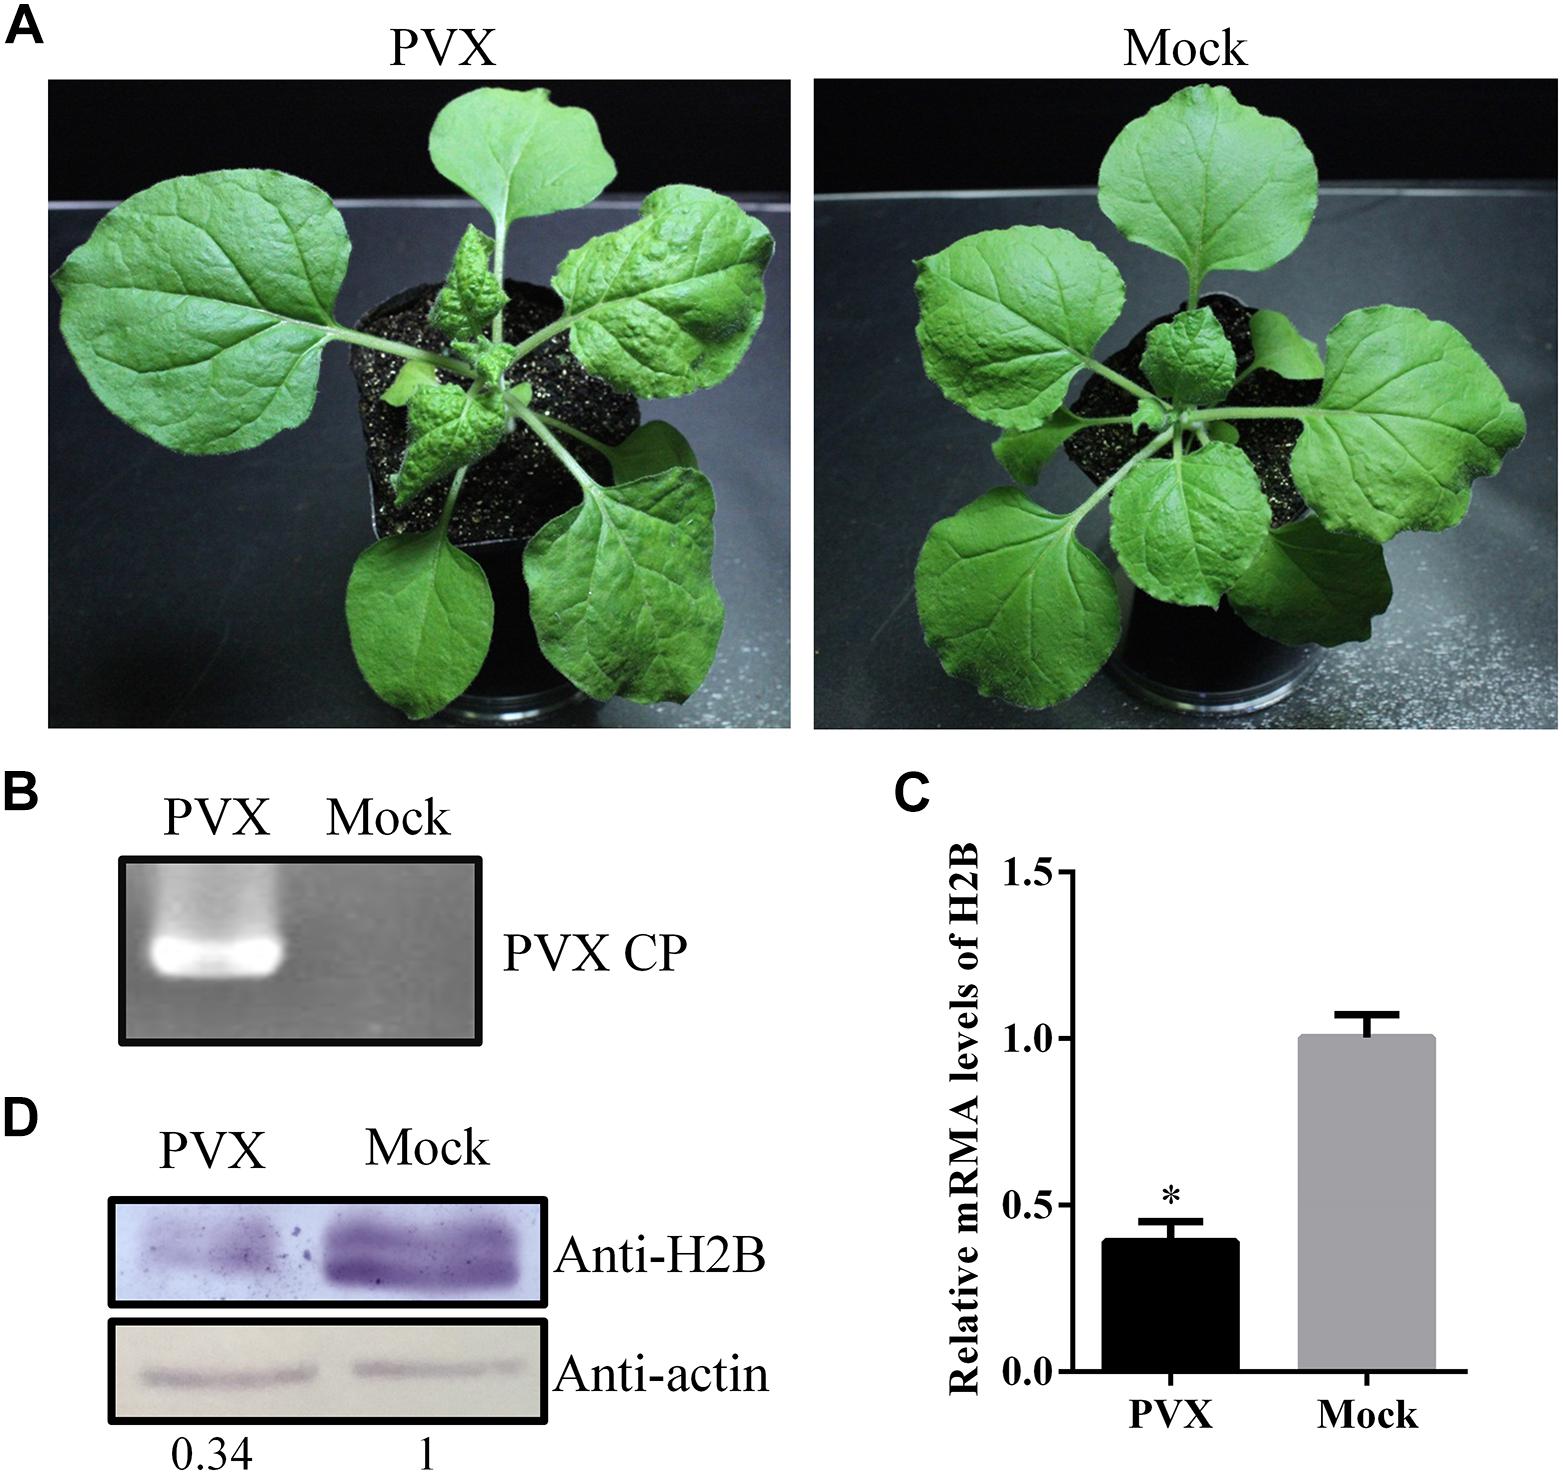 Frontiers Downregulation Of Nuclear Protein H2b Induces Salicylic Acid Mediated Defense Against Pvx Infection In Nicotiana Benthamiana Microbiology